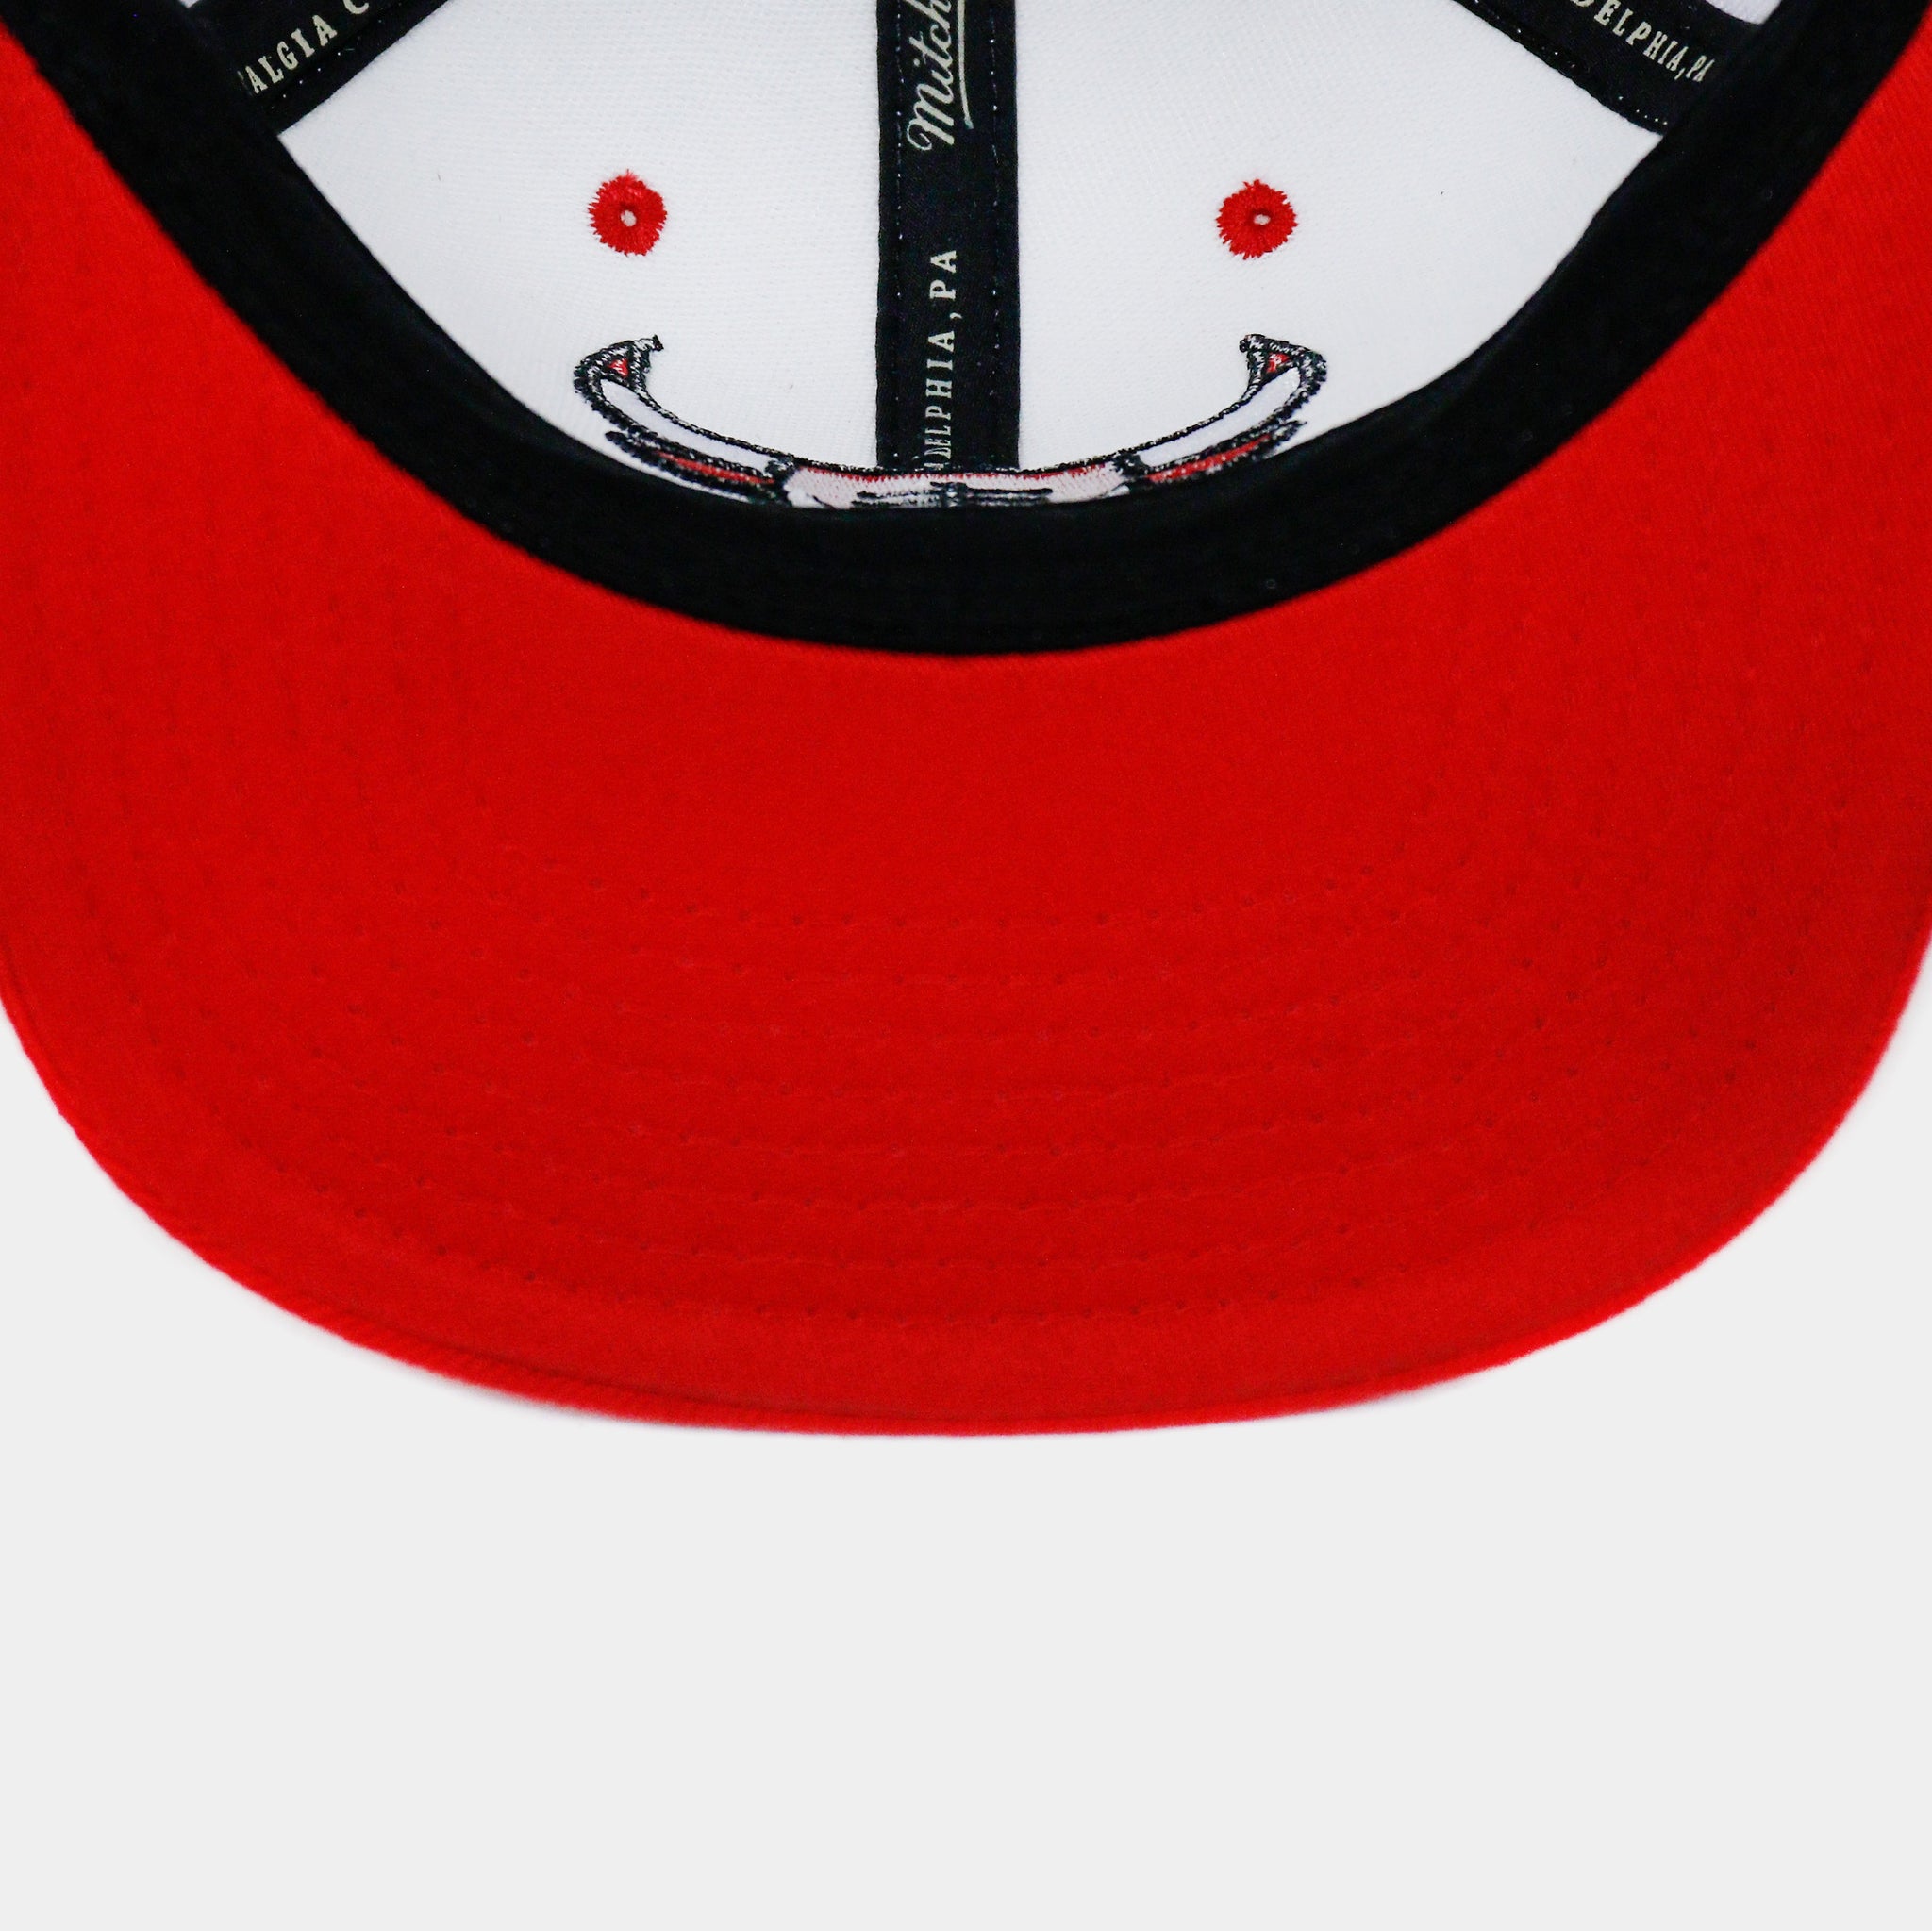 Mitchell & Ness - NBA Red Snapback Cap - Chicago Bulls All Directions Red Snapback @ Hatstore